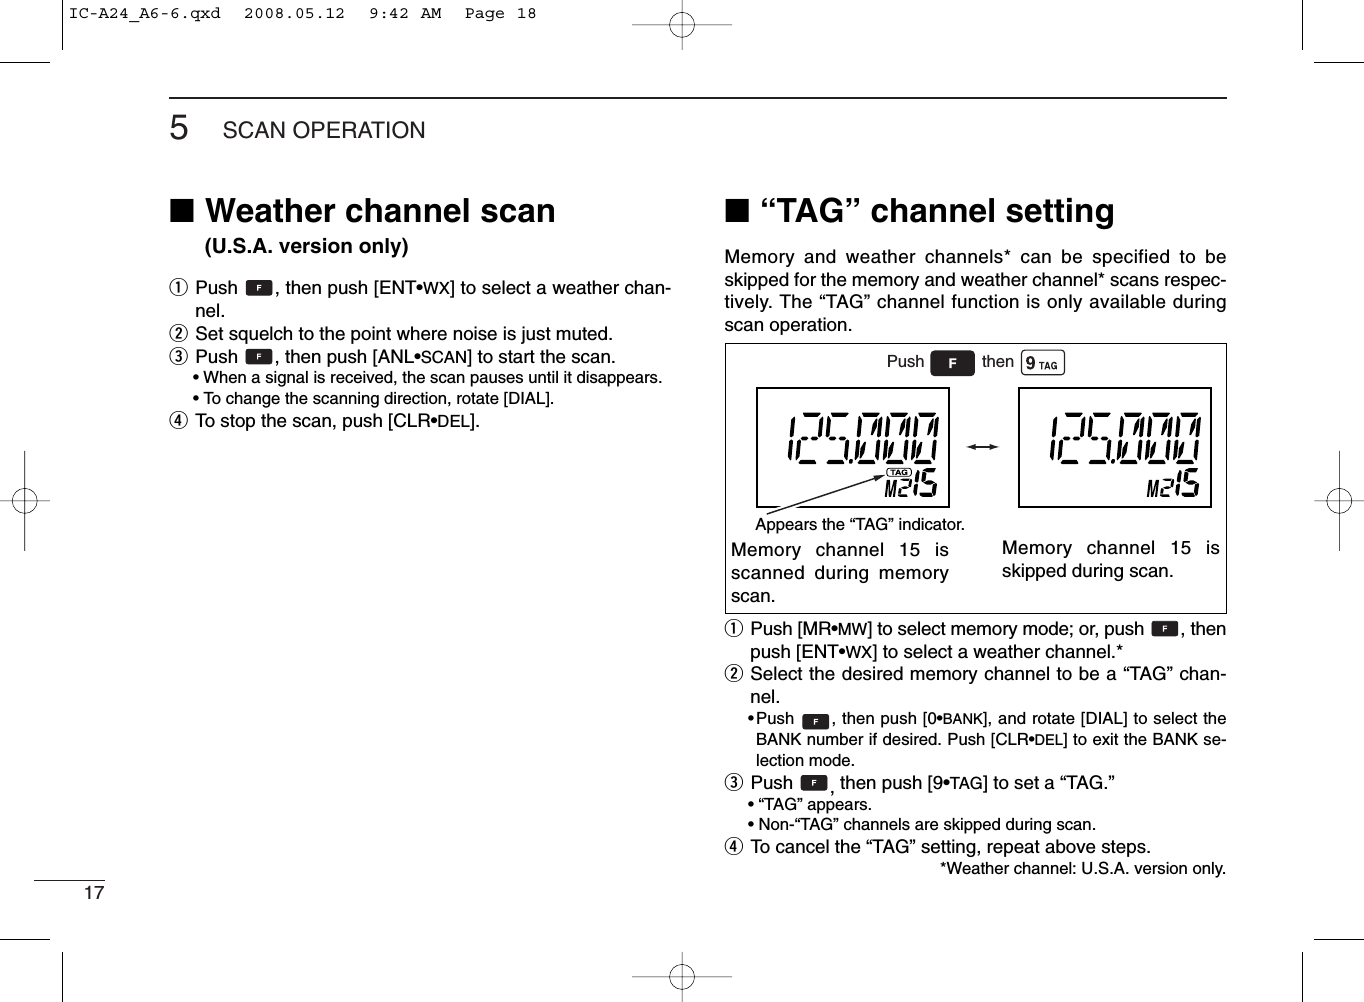 175SCAN OPERATION■Weather channel scan (U.S.A. version only)qPush  , then push [ENT•WX] to select a weather chan-nel.wSet squelch to the point where noise is just muted.ePush  , then push [ANL•SCAN] to start the scan.• When a signal is received, the scan pauses until it disappears.•To change the scanning direction, rotate [DIAL].rTo stop the scan, push [CLR•DEL].■“TAG” channel settingMemory and weather channels* can be specified to beskipped for the memory and weather channel* scans respec-tively. The “TAG” channel function is only available duringscan operation.qPush [MR•MW] to select memory mode; or, push  , thenpush [ENT•WX] to select a weather channel.*wSelect the desired memory channel to be a “TAG” chan-nel.•Push  , then push [0•BANK], and rotate [DIAL] to select theBANK number if desired. Push [CLR•DEL] to exit the BANK se-lection mode.ePush  ,then push [9•TAG] to set a “TAG.”•“TAG” appears.•Non-“TAG” channels are skipped during scan.rTo cancel the “TAG” setting, repeat above steps.*Weather channel: U.S.A. version only.Memory channel 15 isscanned during memoryscan.Memory channel 15 isskipped during scan.Push thenAppears the “TAG” indicator.IC-A24_A6-6.qxd  2008.05.12  9:42 AM  Page 18